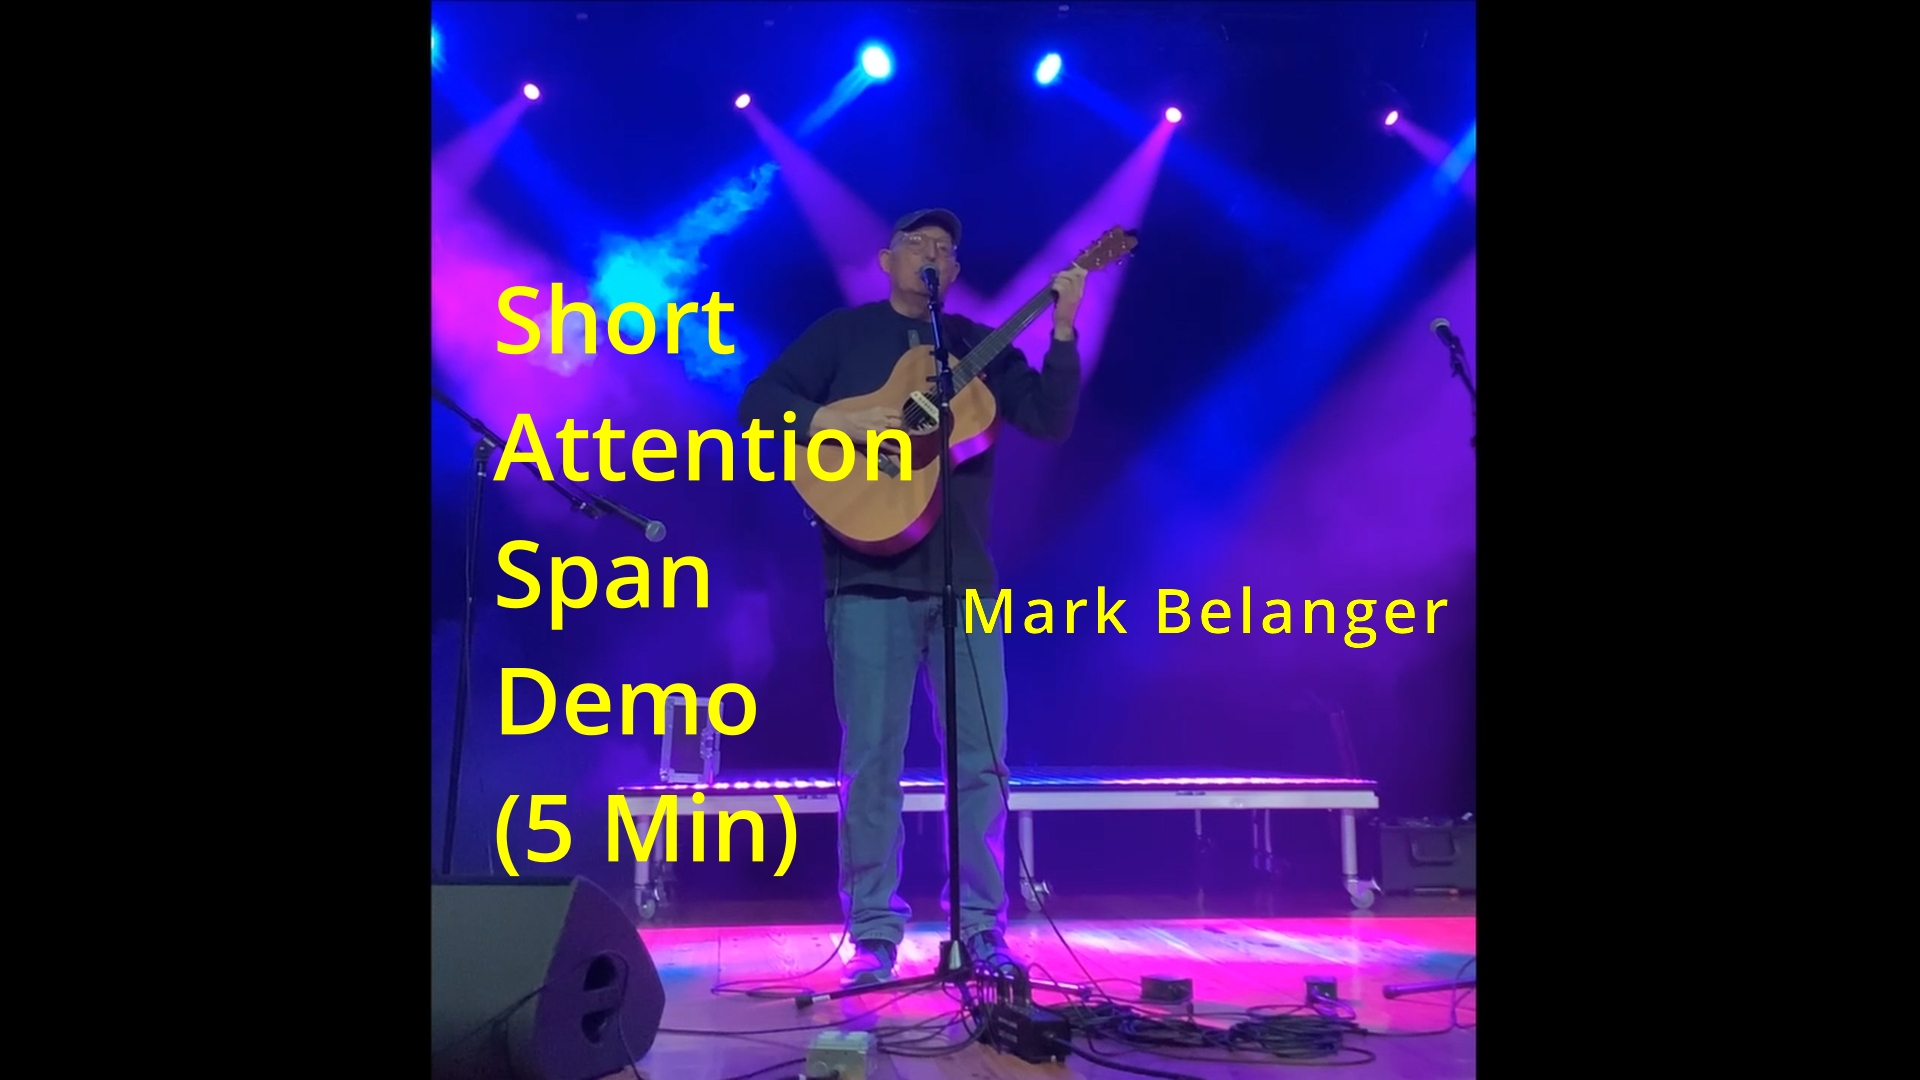 Short Attention Span Demo